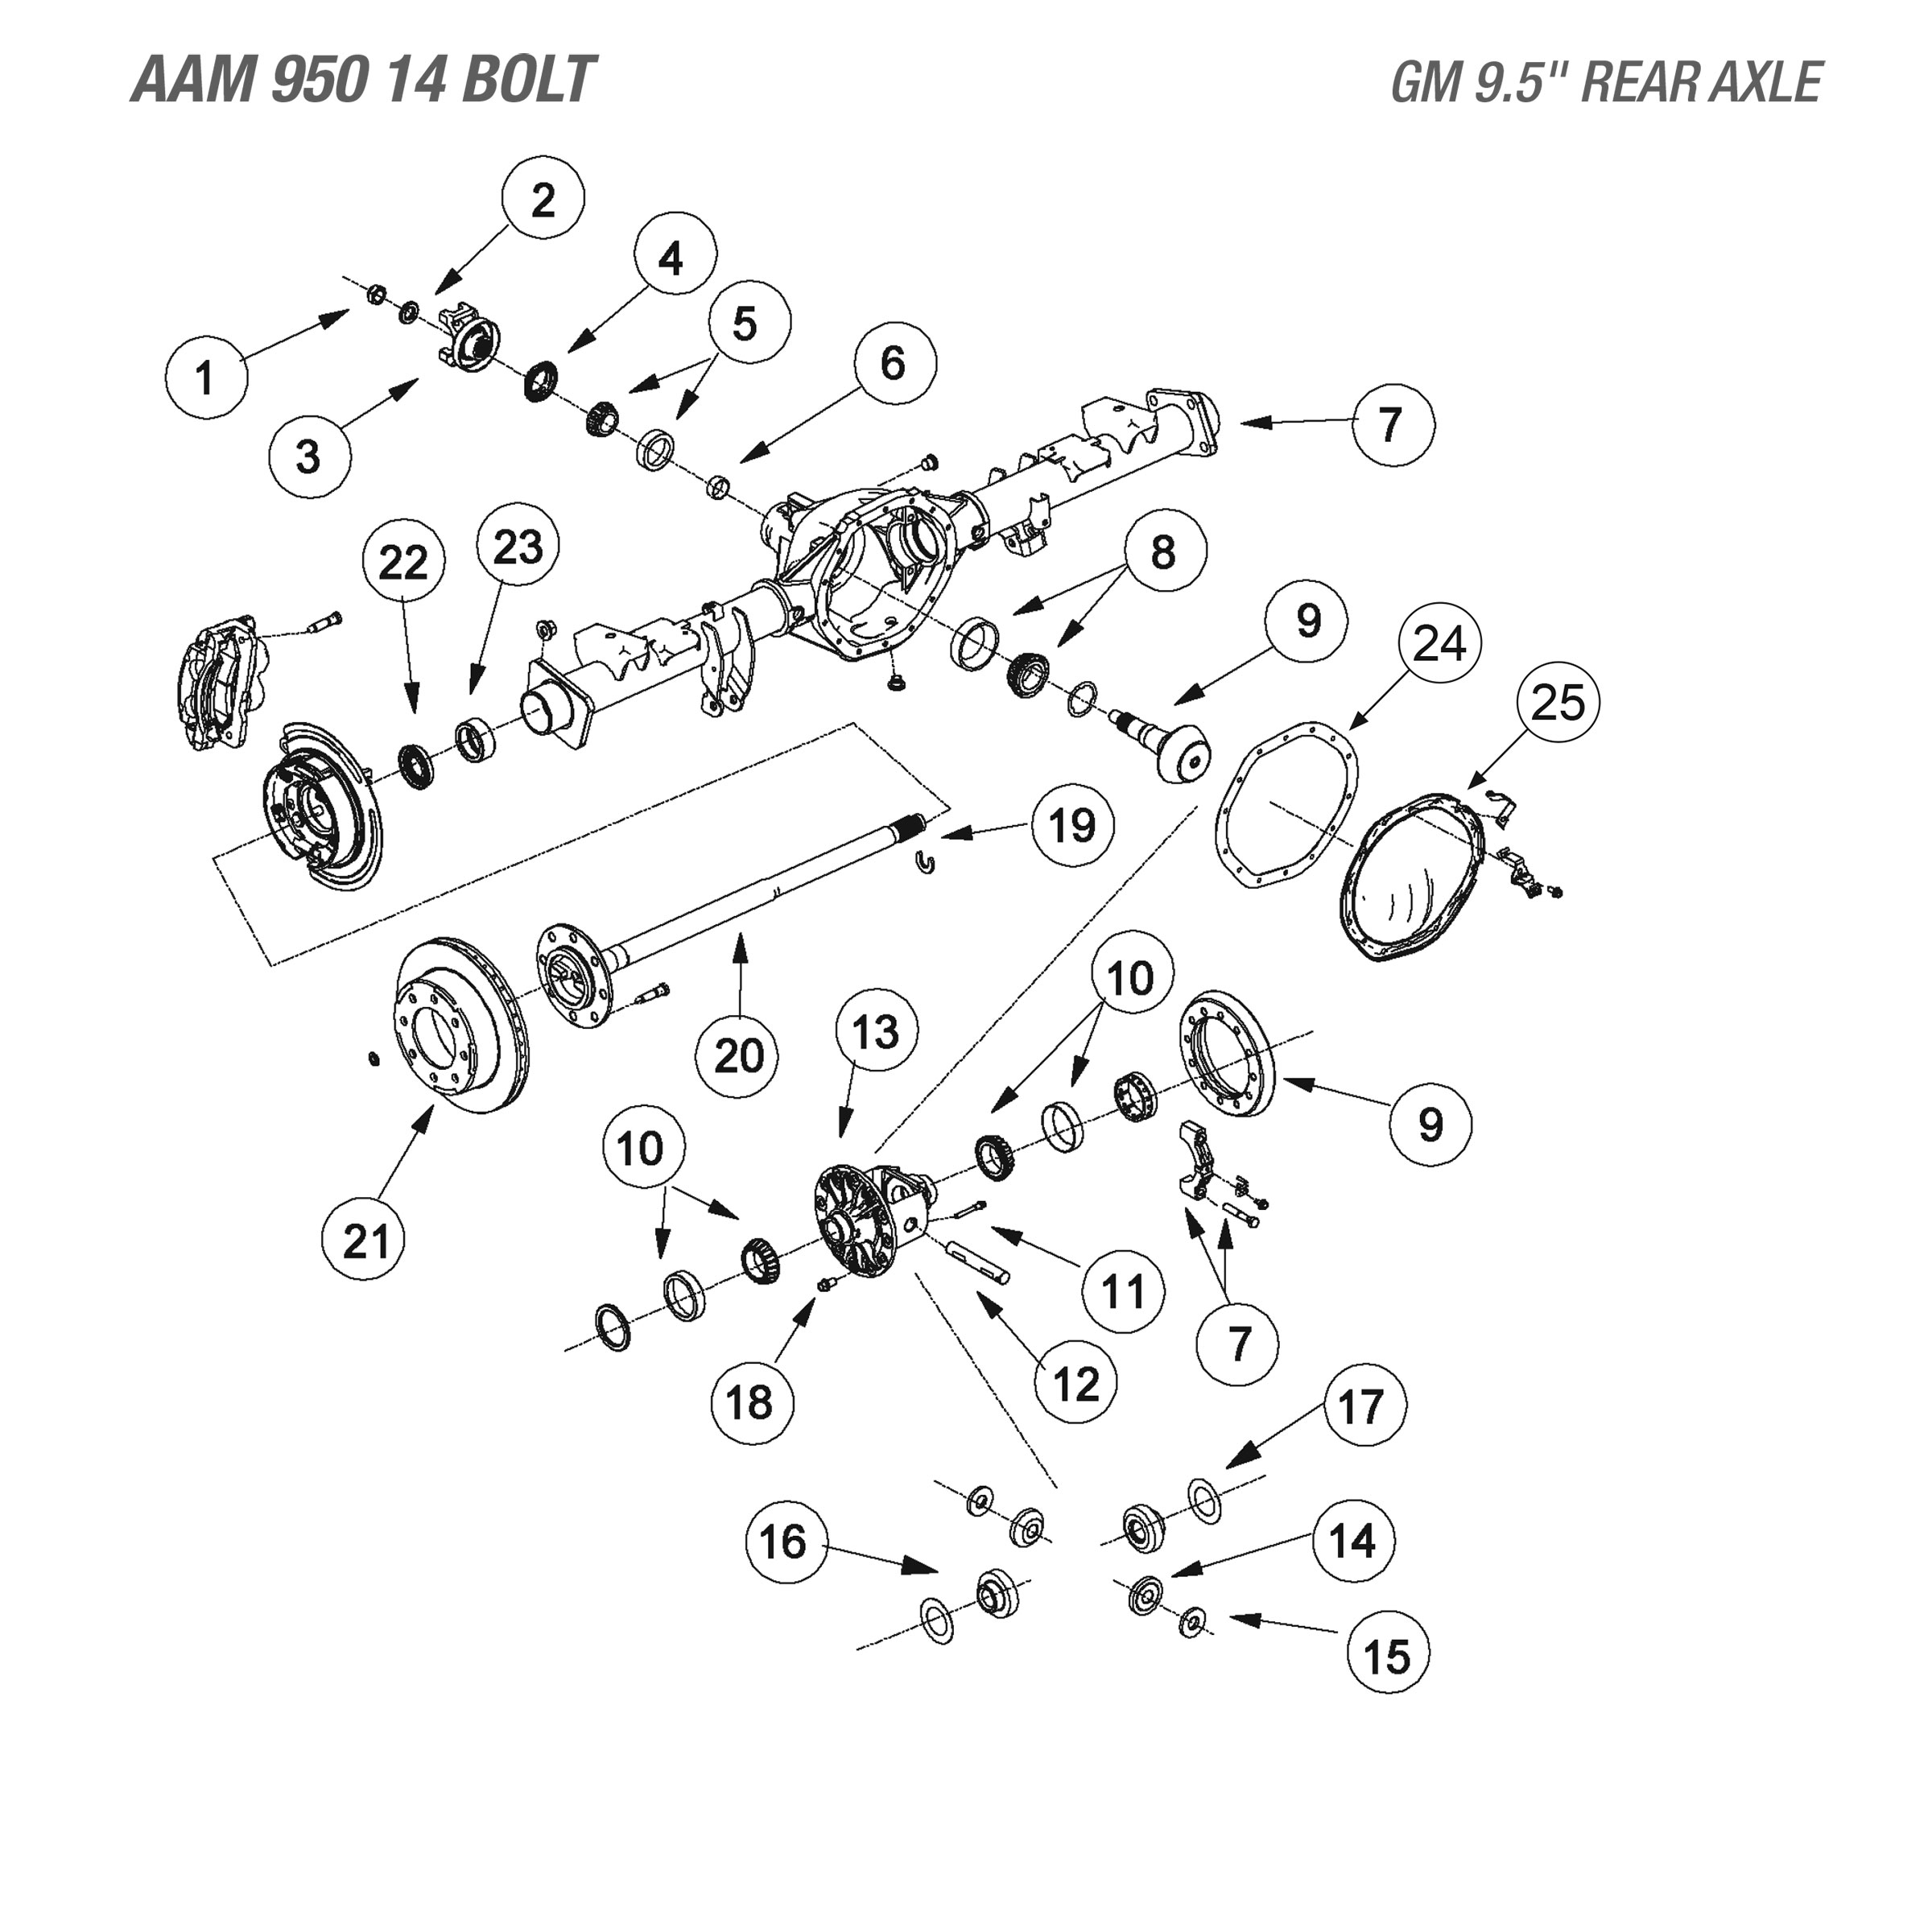 GM 9.5 14-Bolt Exploded View